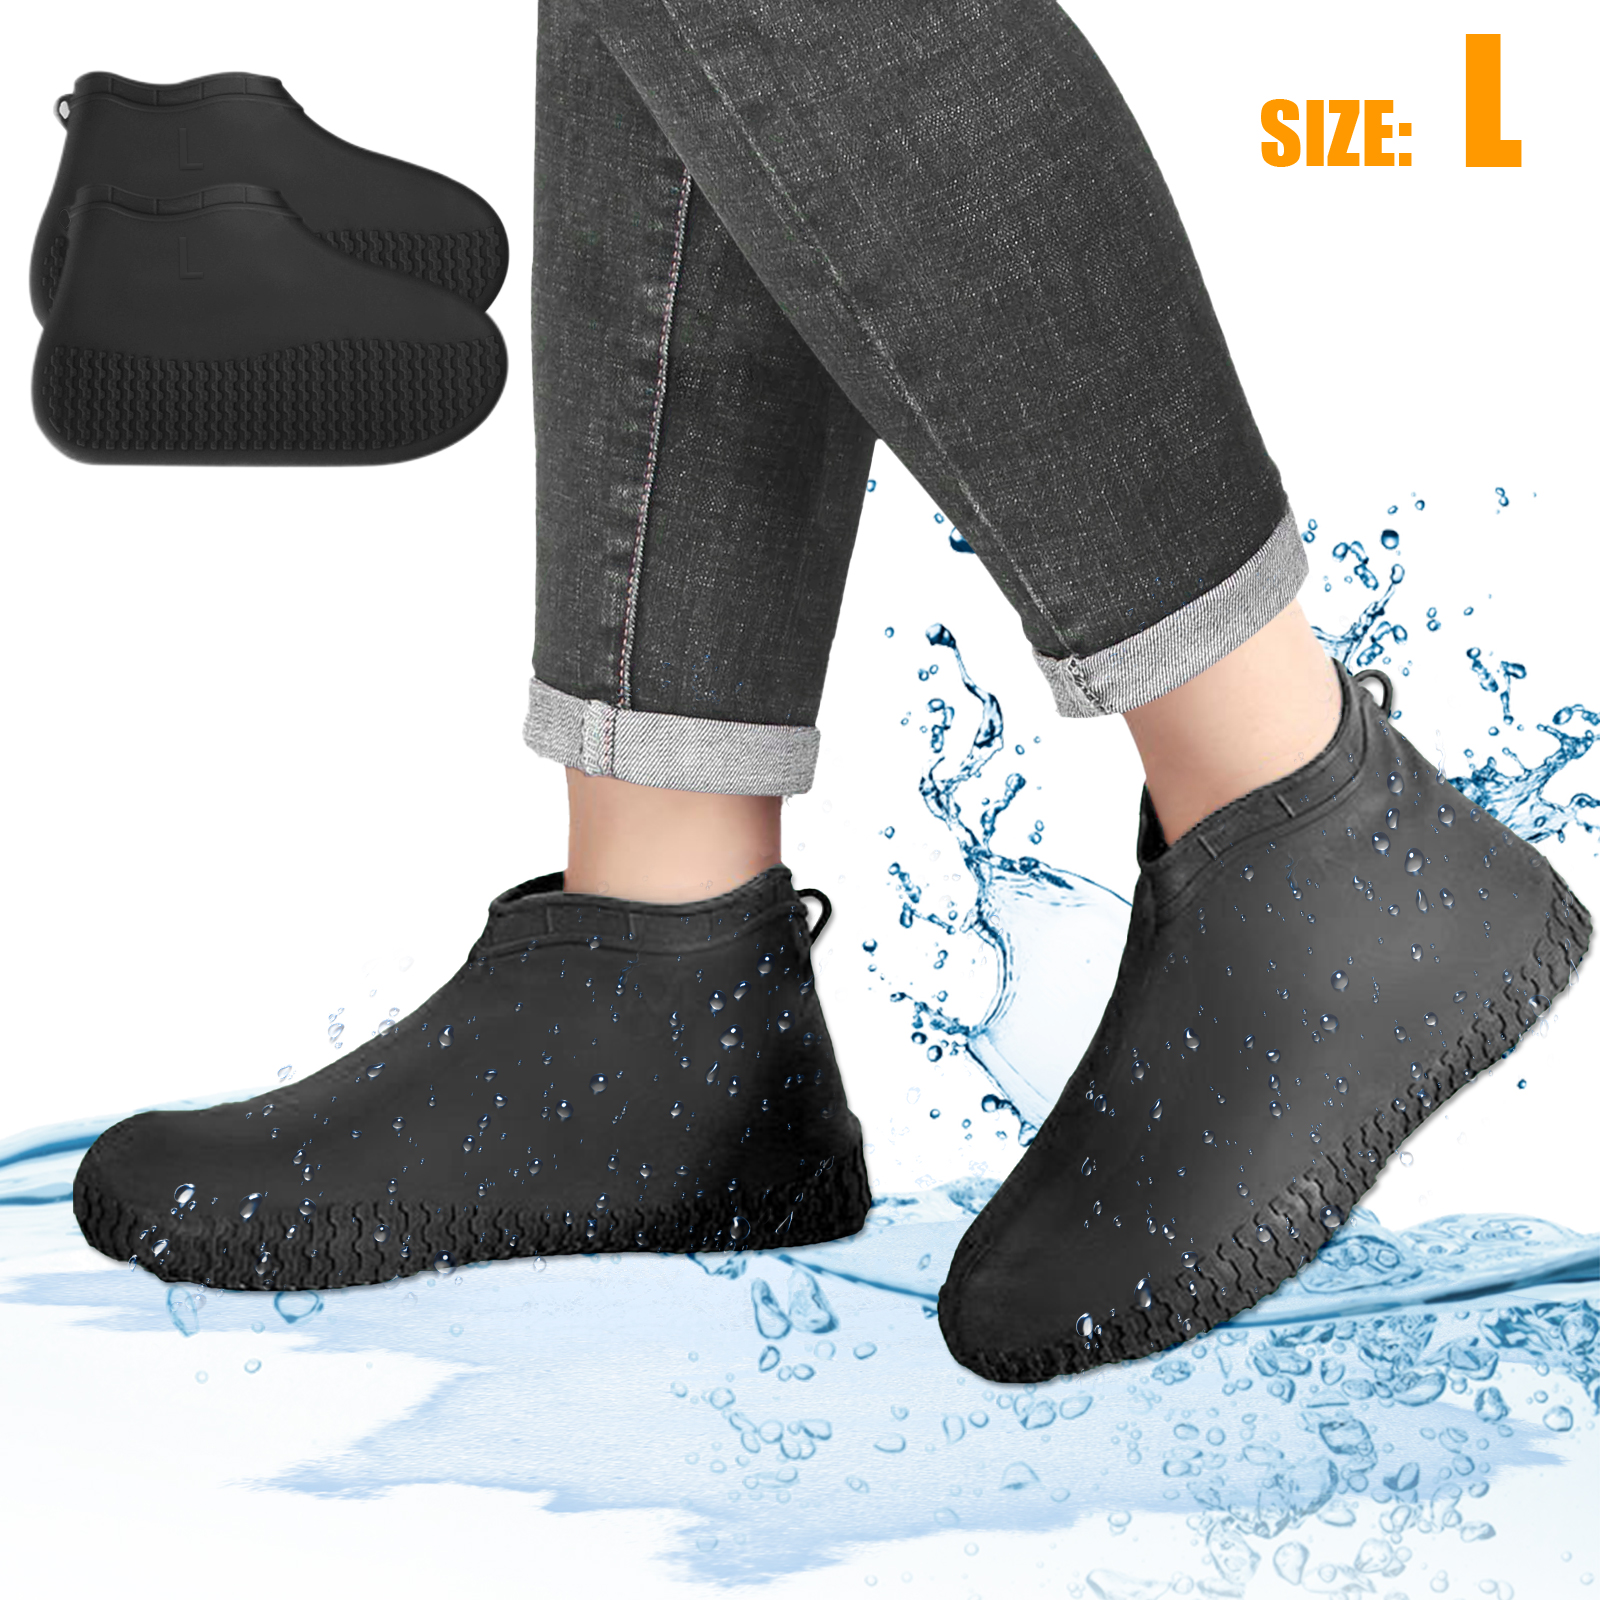 Waterproof Shoe Covers Silicone Overshoes Rain Boot Cover Protector Recyclable 